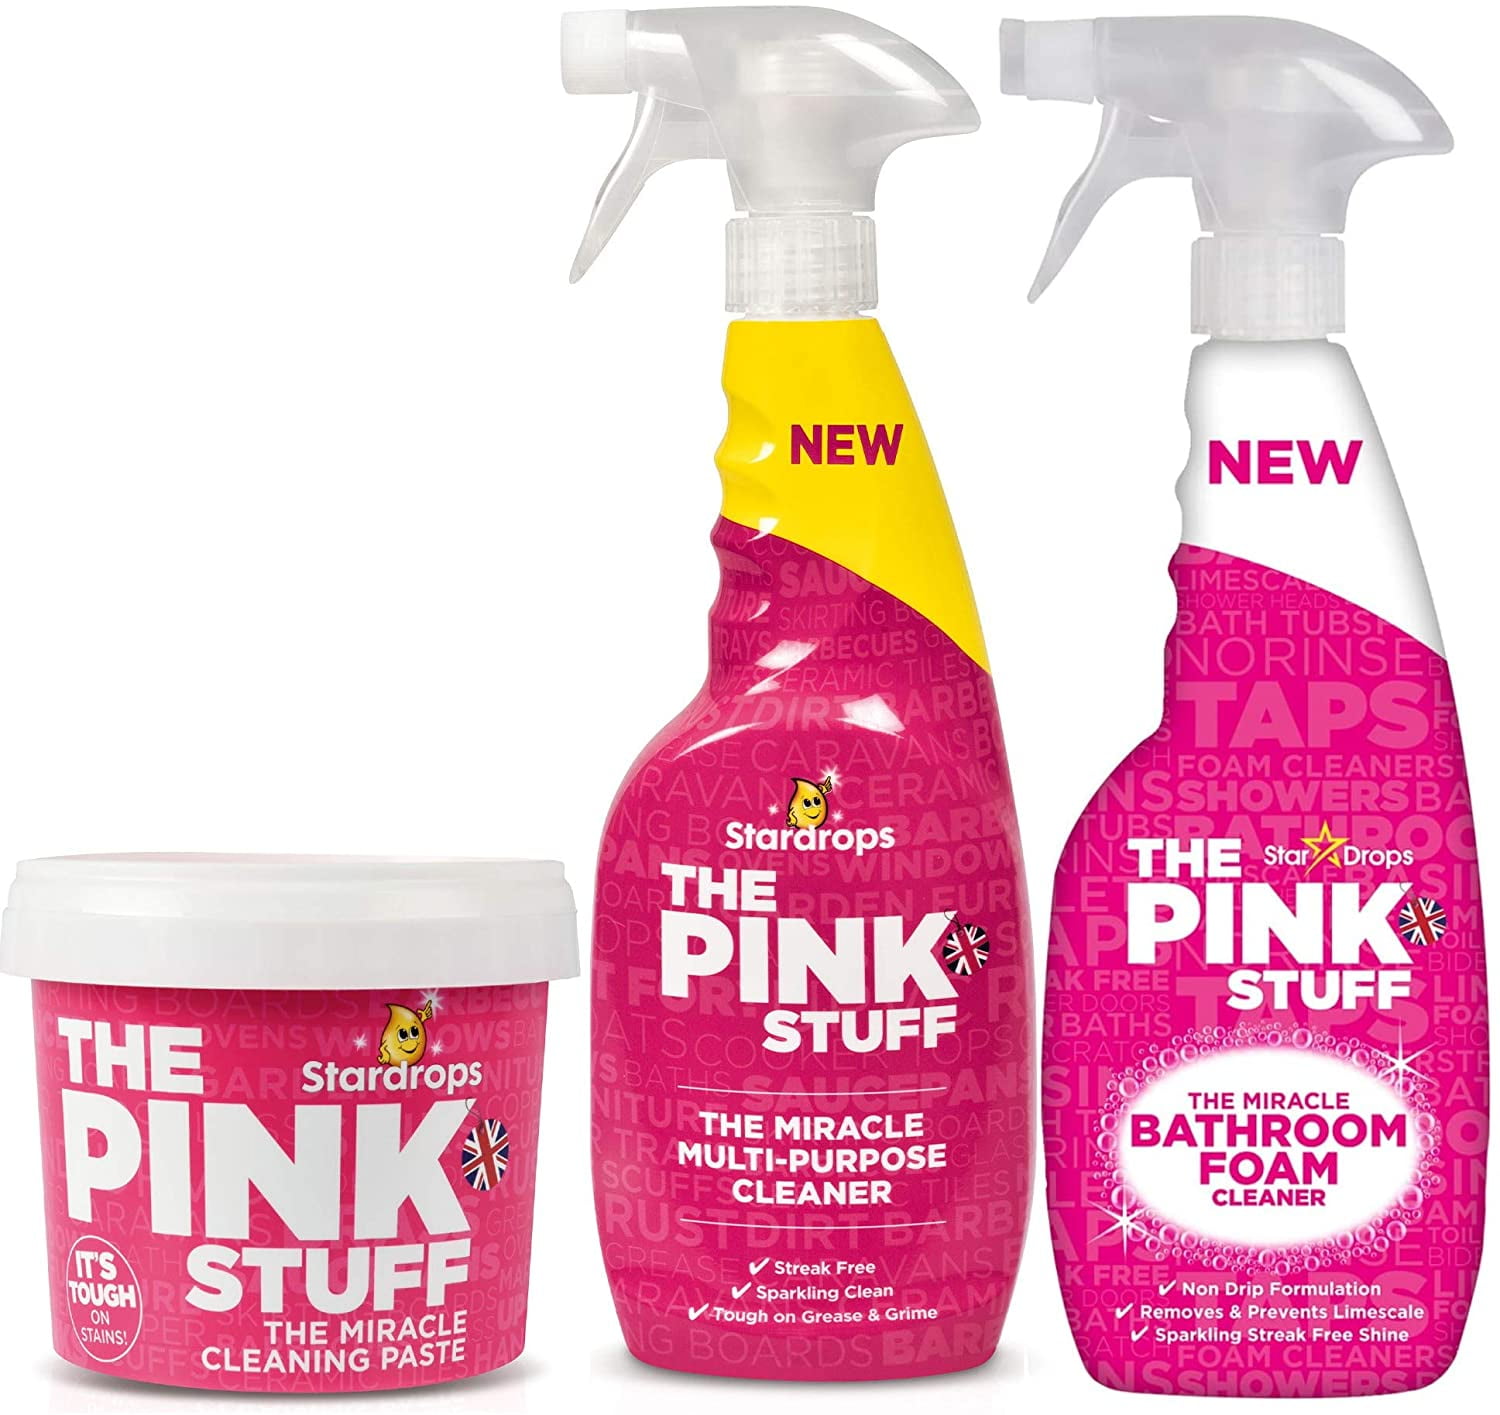 Spray & go with the new Elbow Grease® foaming Bathroom Mousse